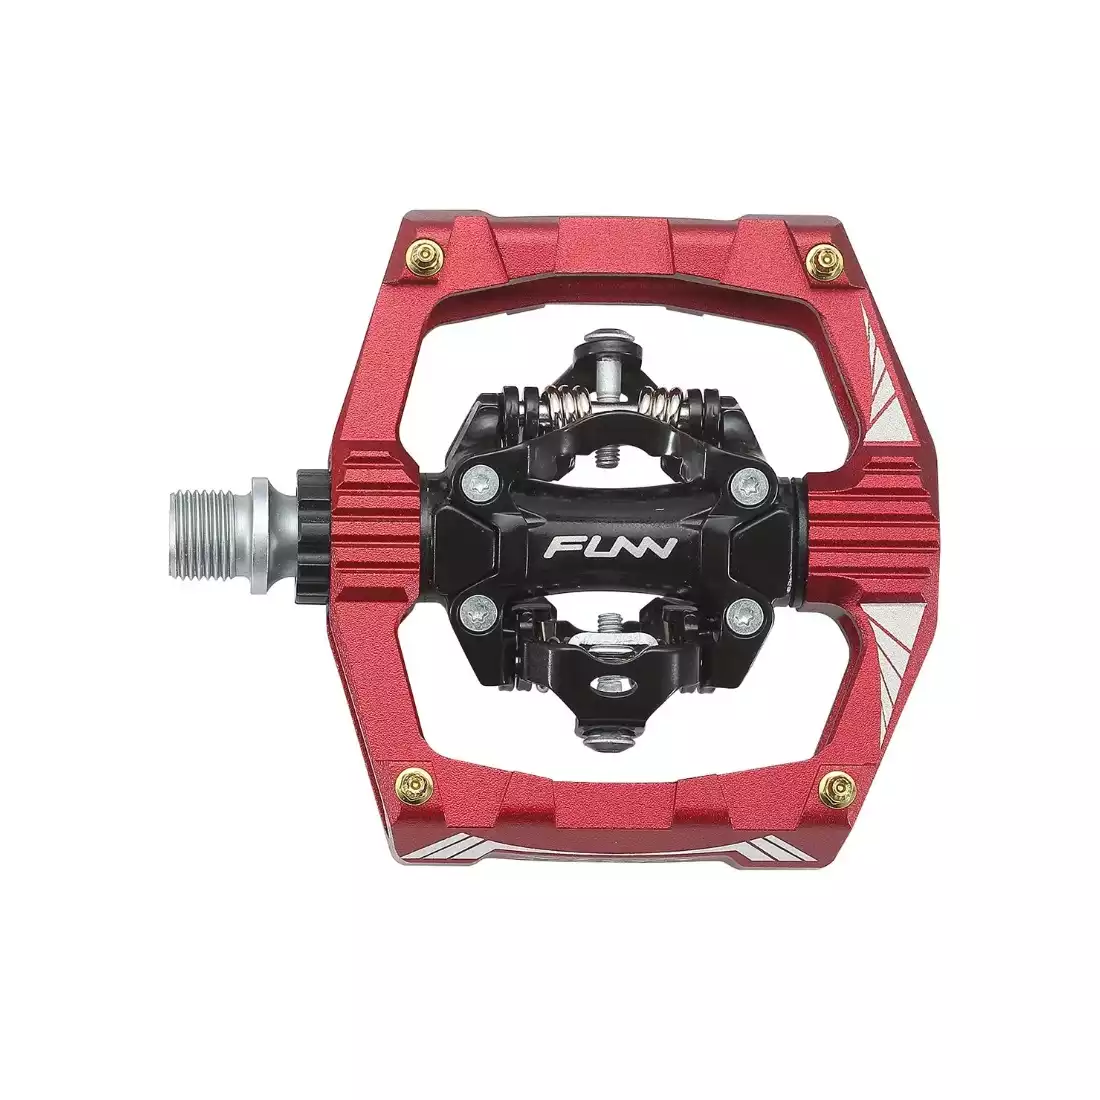 FUNN RIPPER Bicycle pedals, double-sided, red